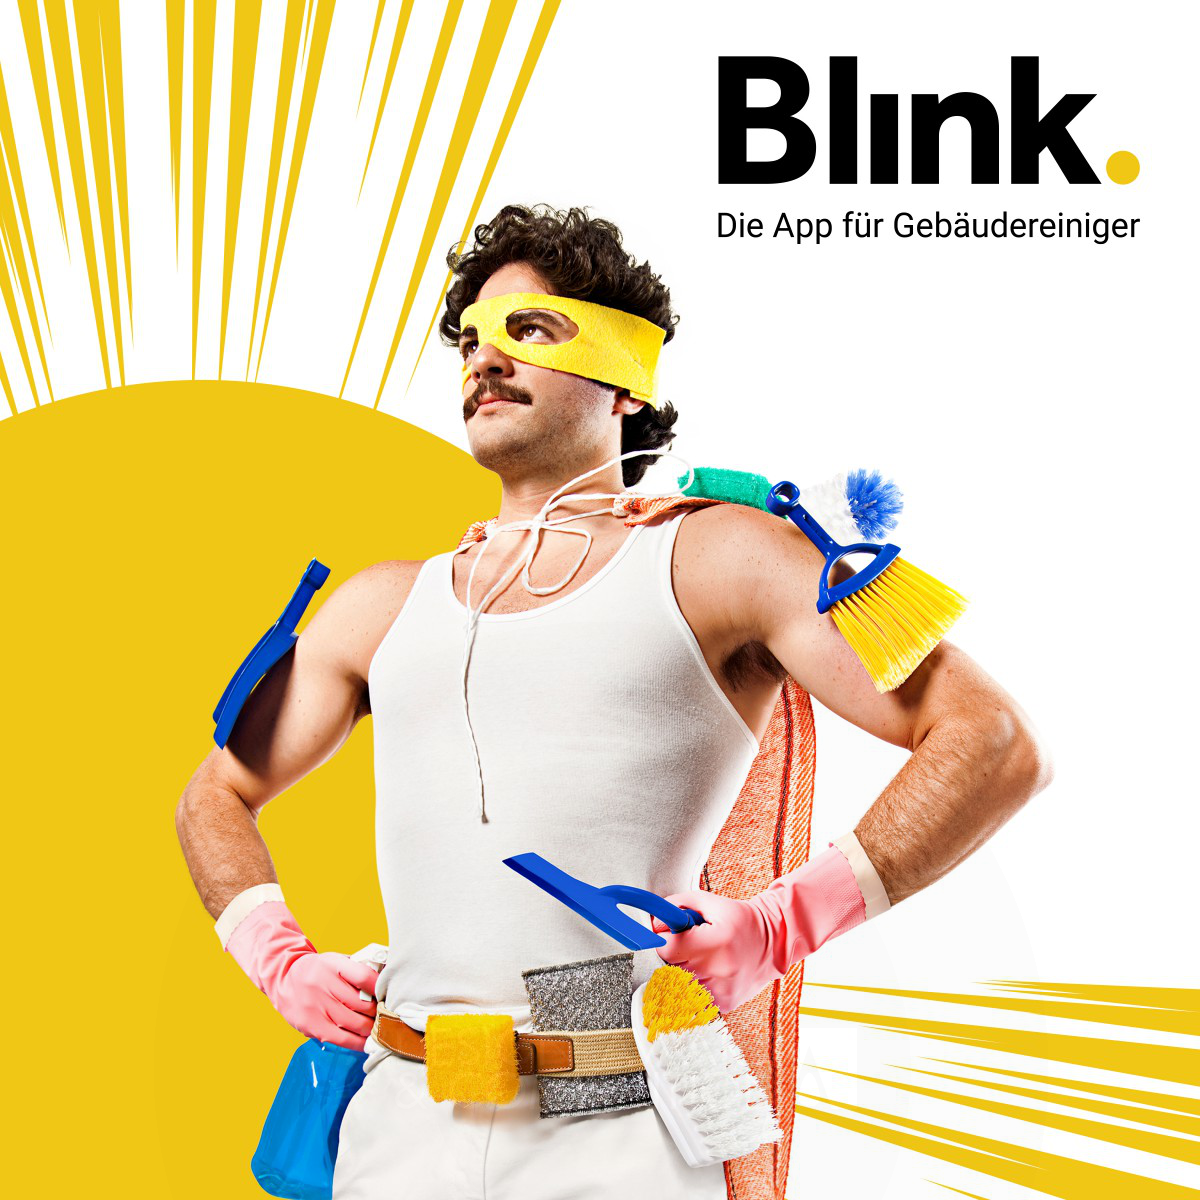 Bloom advertising agency wins Iron at the prestigious A' Advertising, Marketing and Communication Design Award with Blink App Image Campaign .